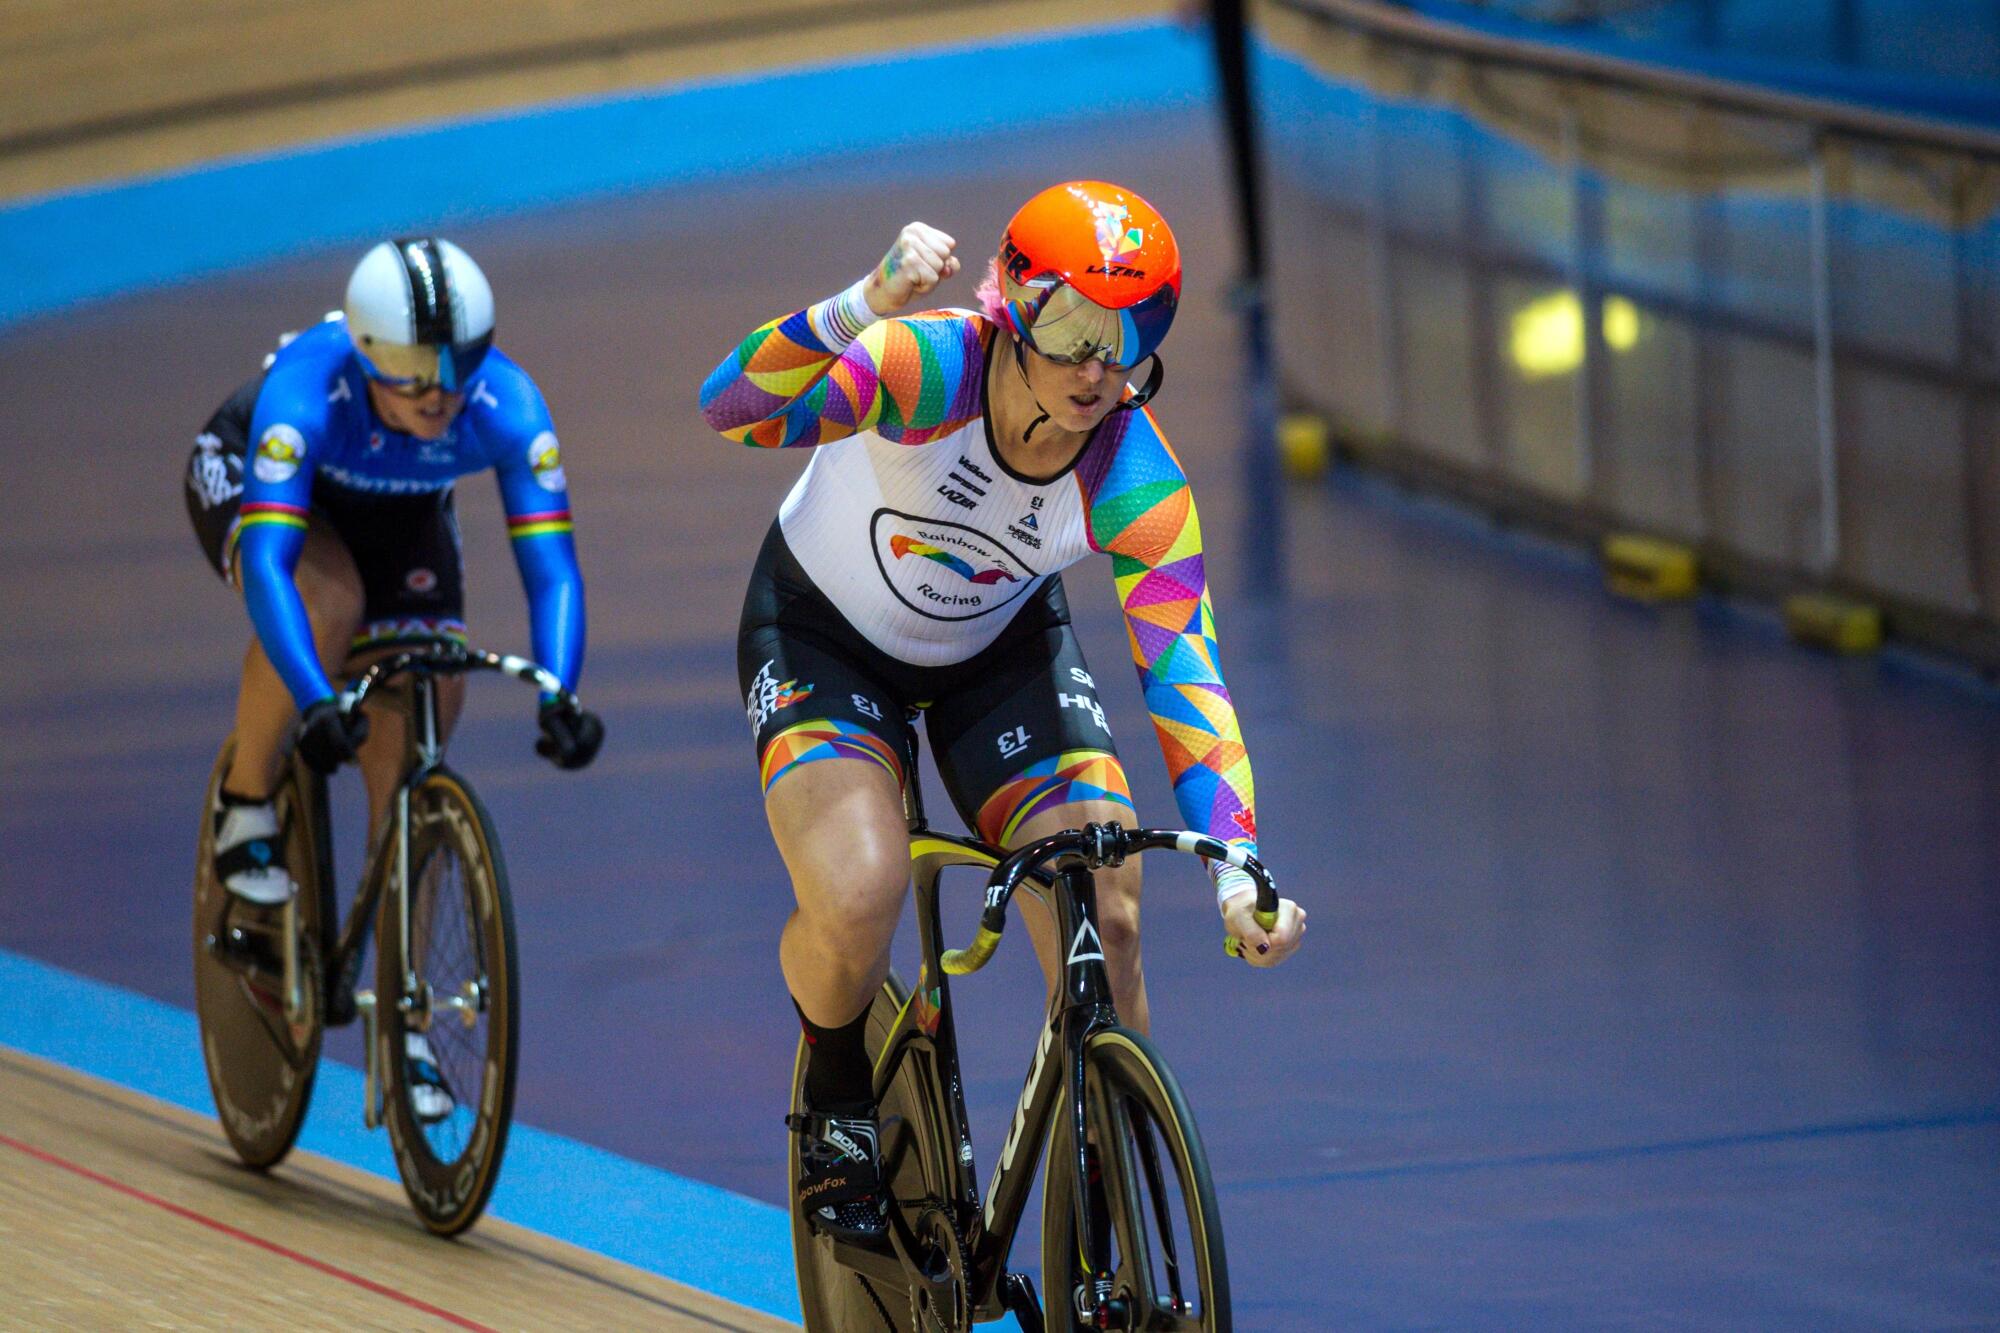 Veronica Ivy celebrates after winning a sprint final at the 2019 UCI Track Cycling World Masters Championship.